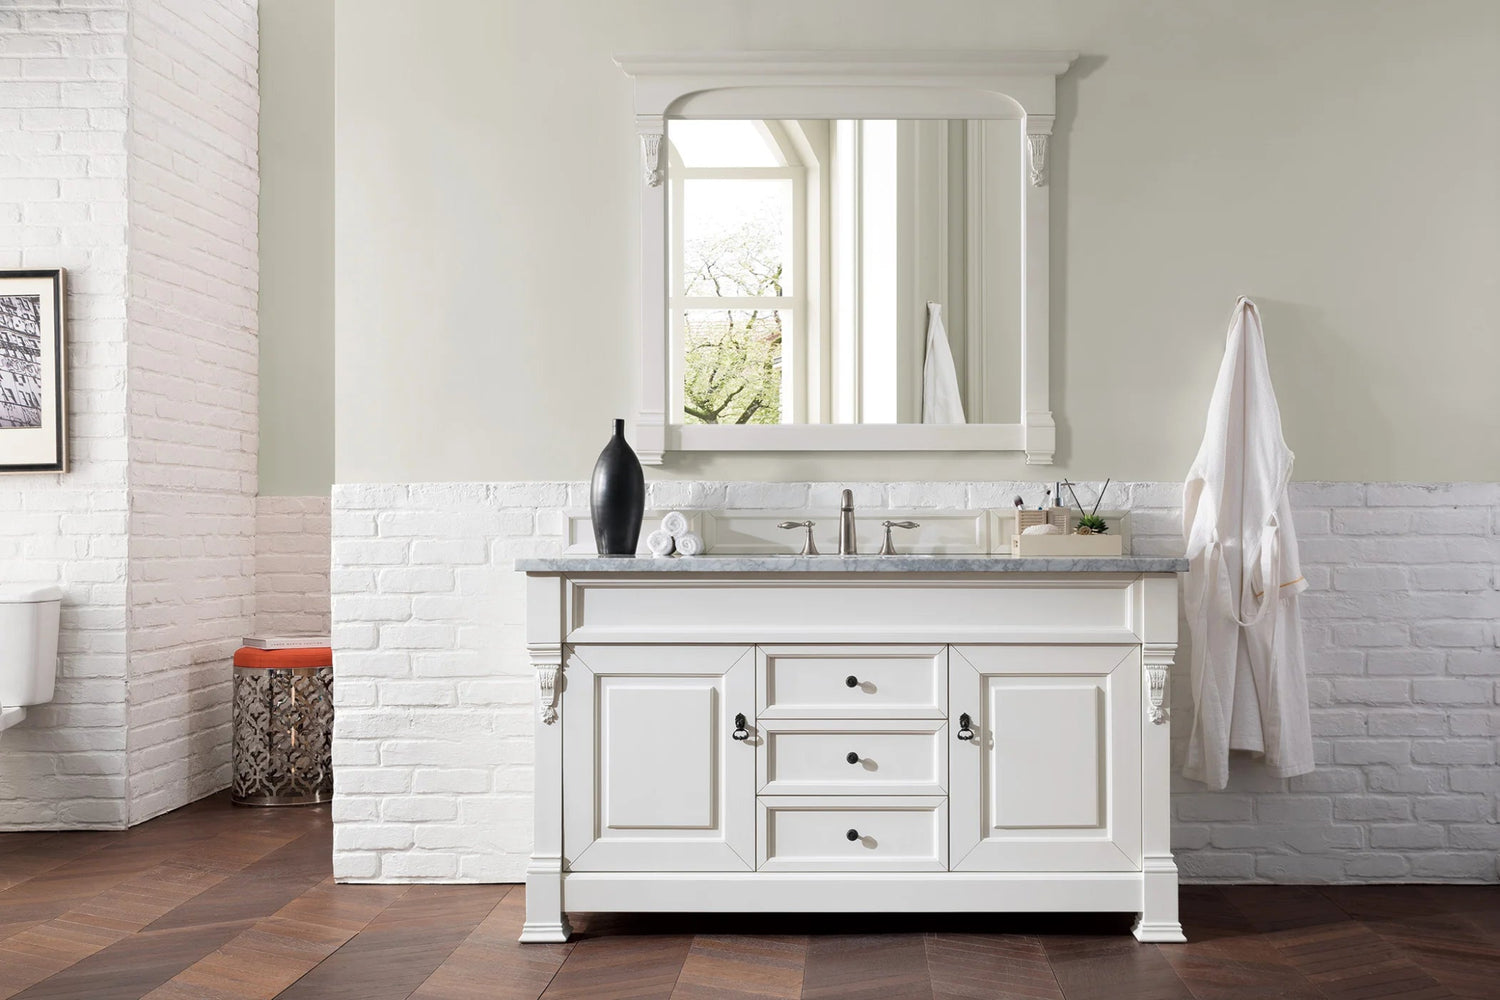 Carrara Marble Vanities: A Classic Investment for Timeless Bathroom Beauty - Elsa Home And Beauty